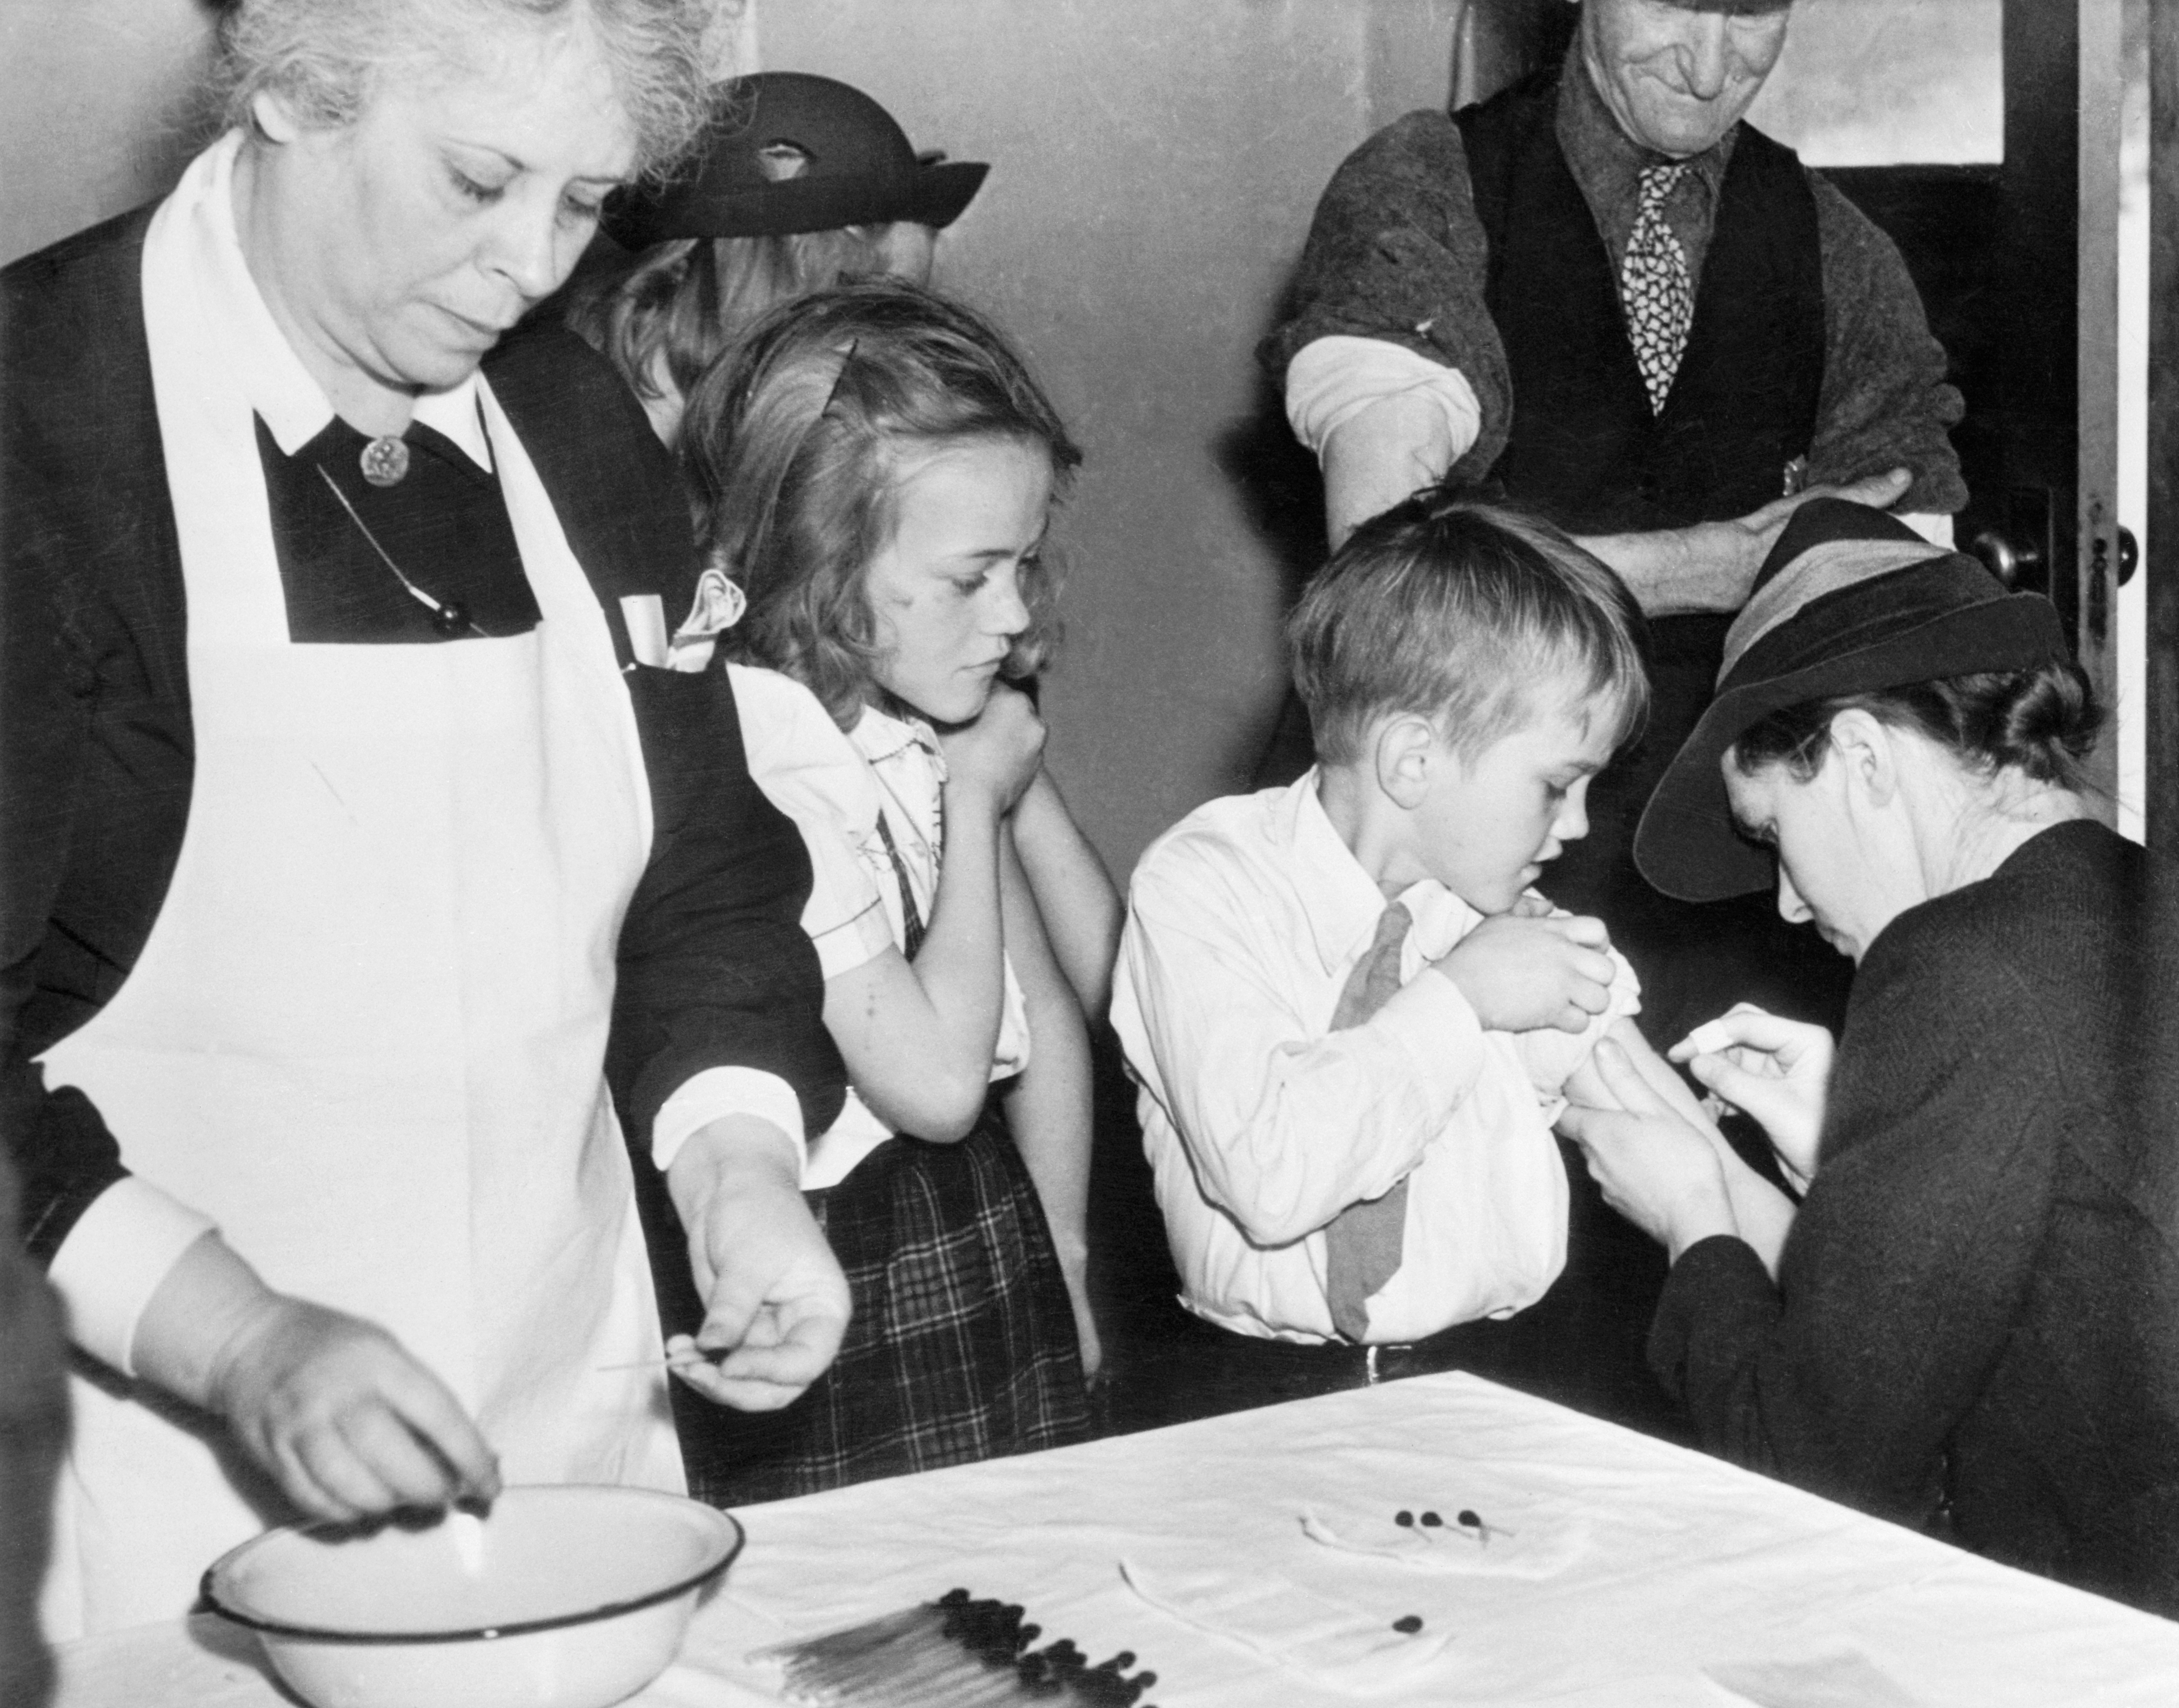 Residents of Albany undergoing vaccinations. (Getty Images)